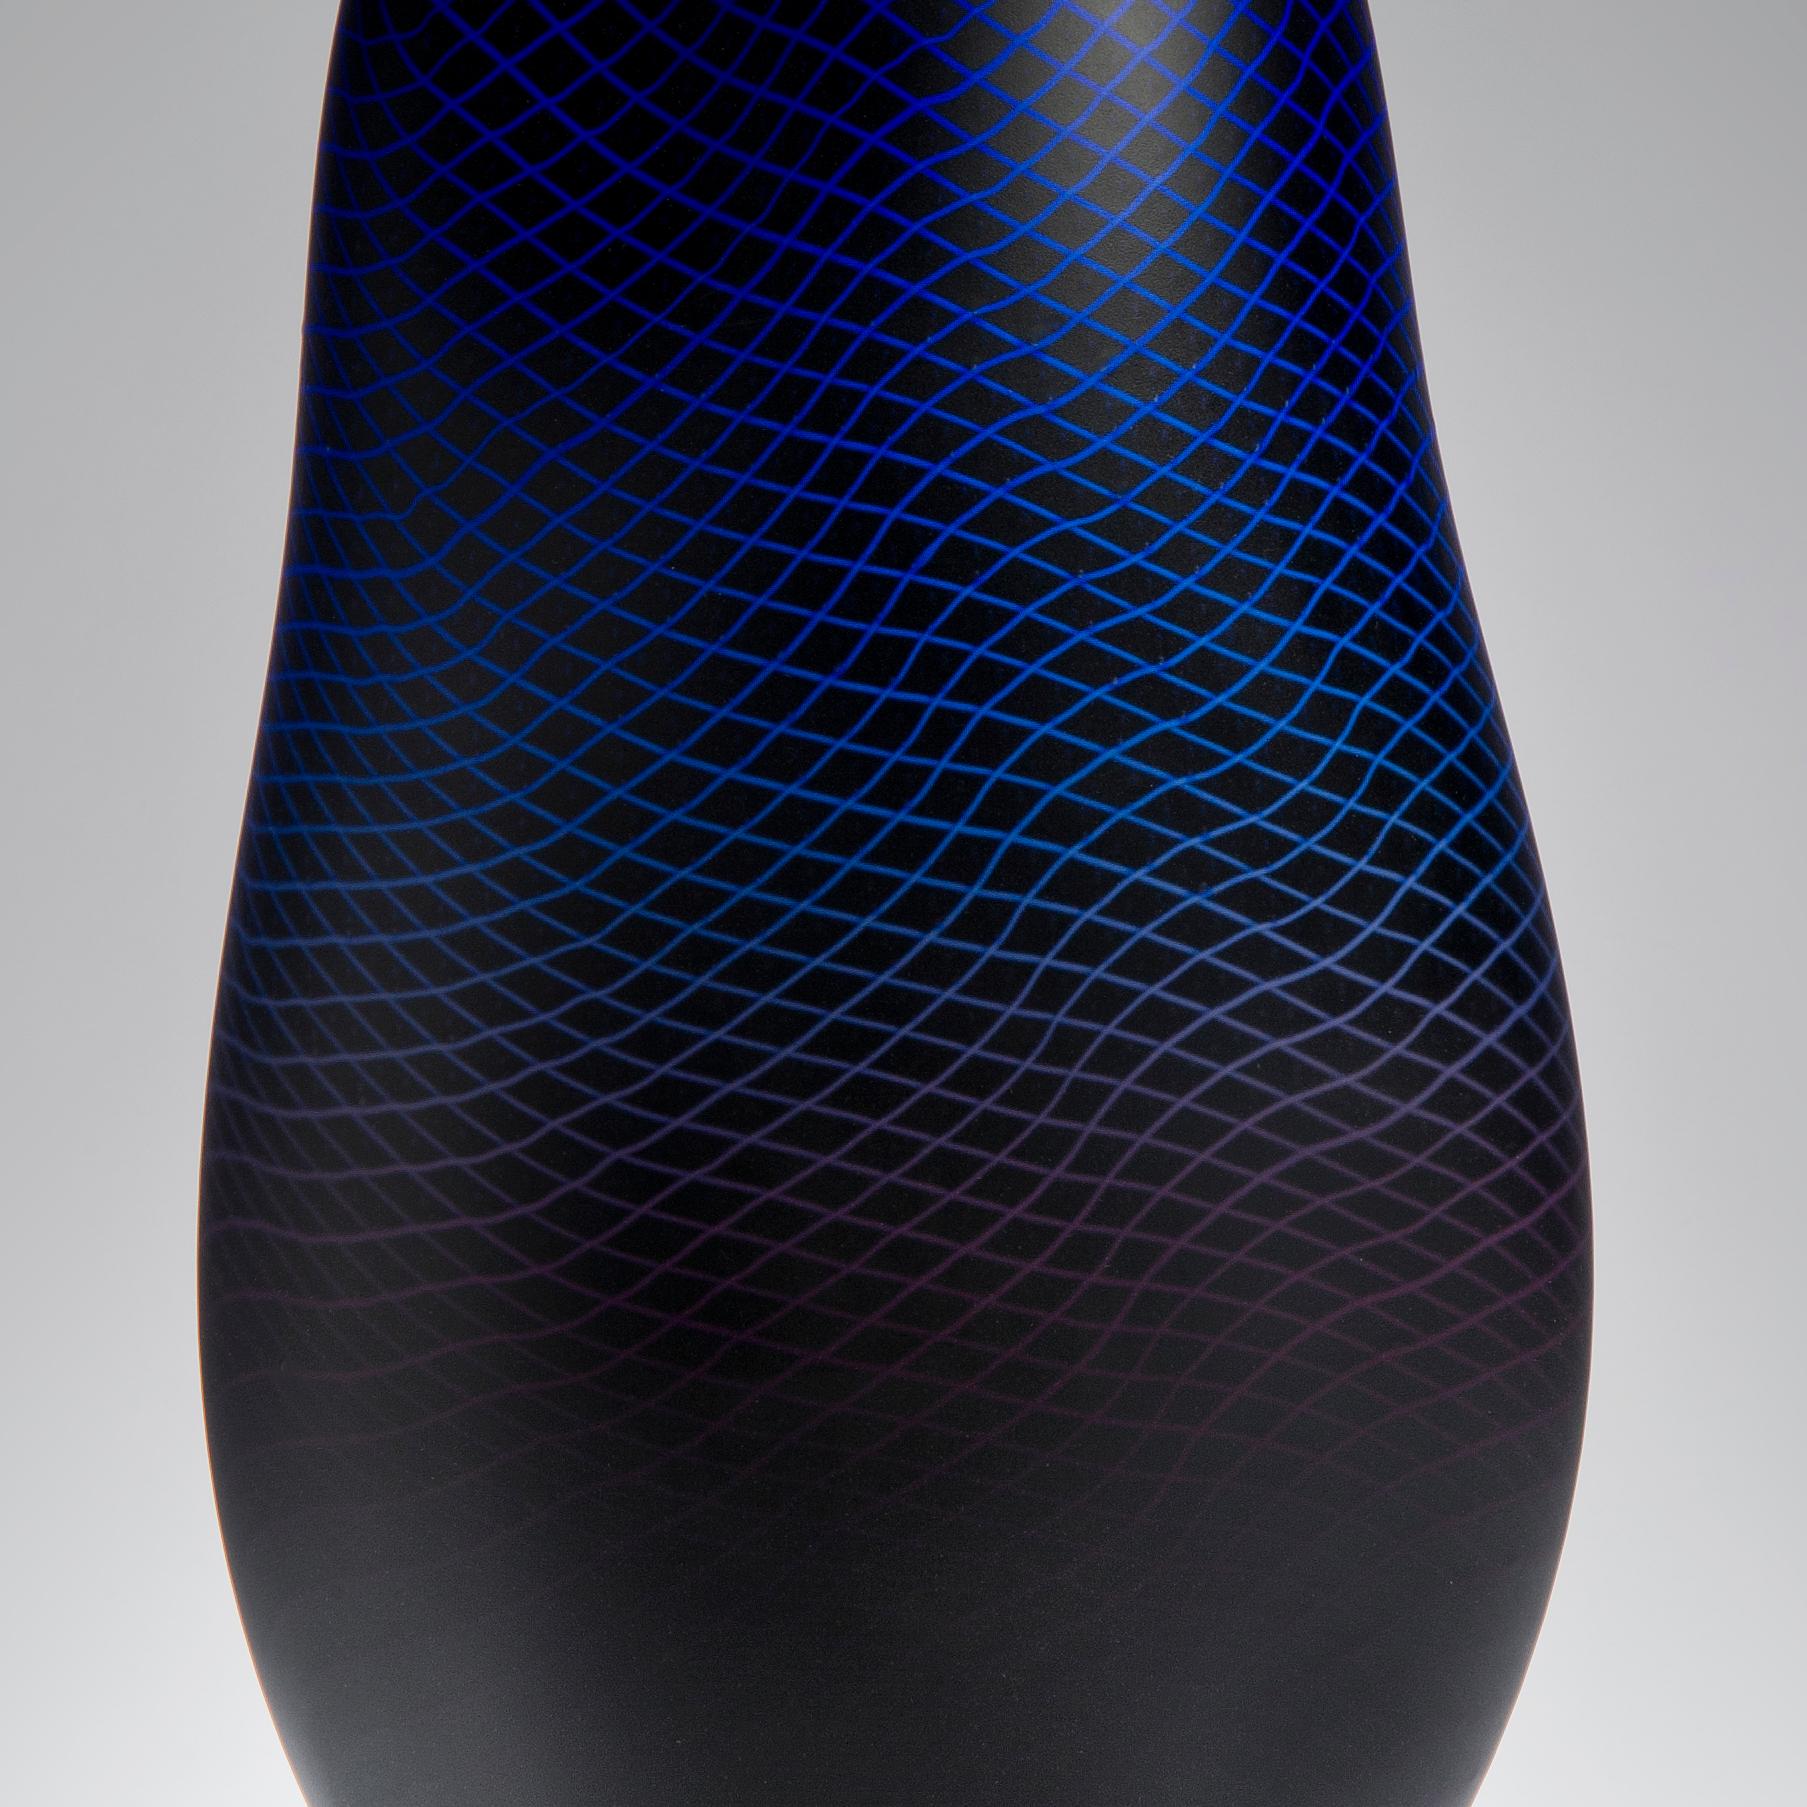 British Warp/Fade/Distort 001, a Glass Vessel in Purple, Black and Blue by Liam Reeves